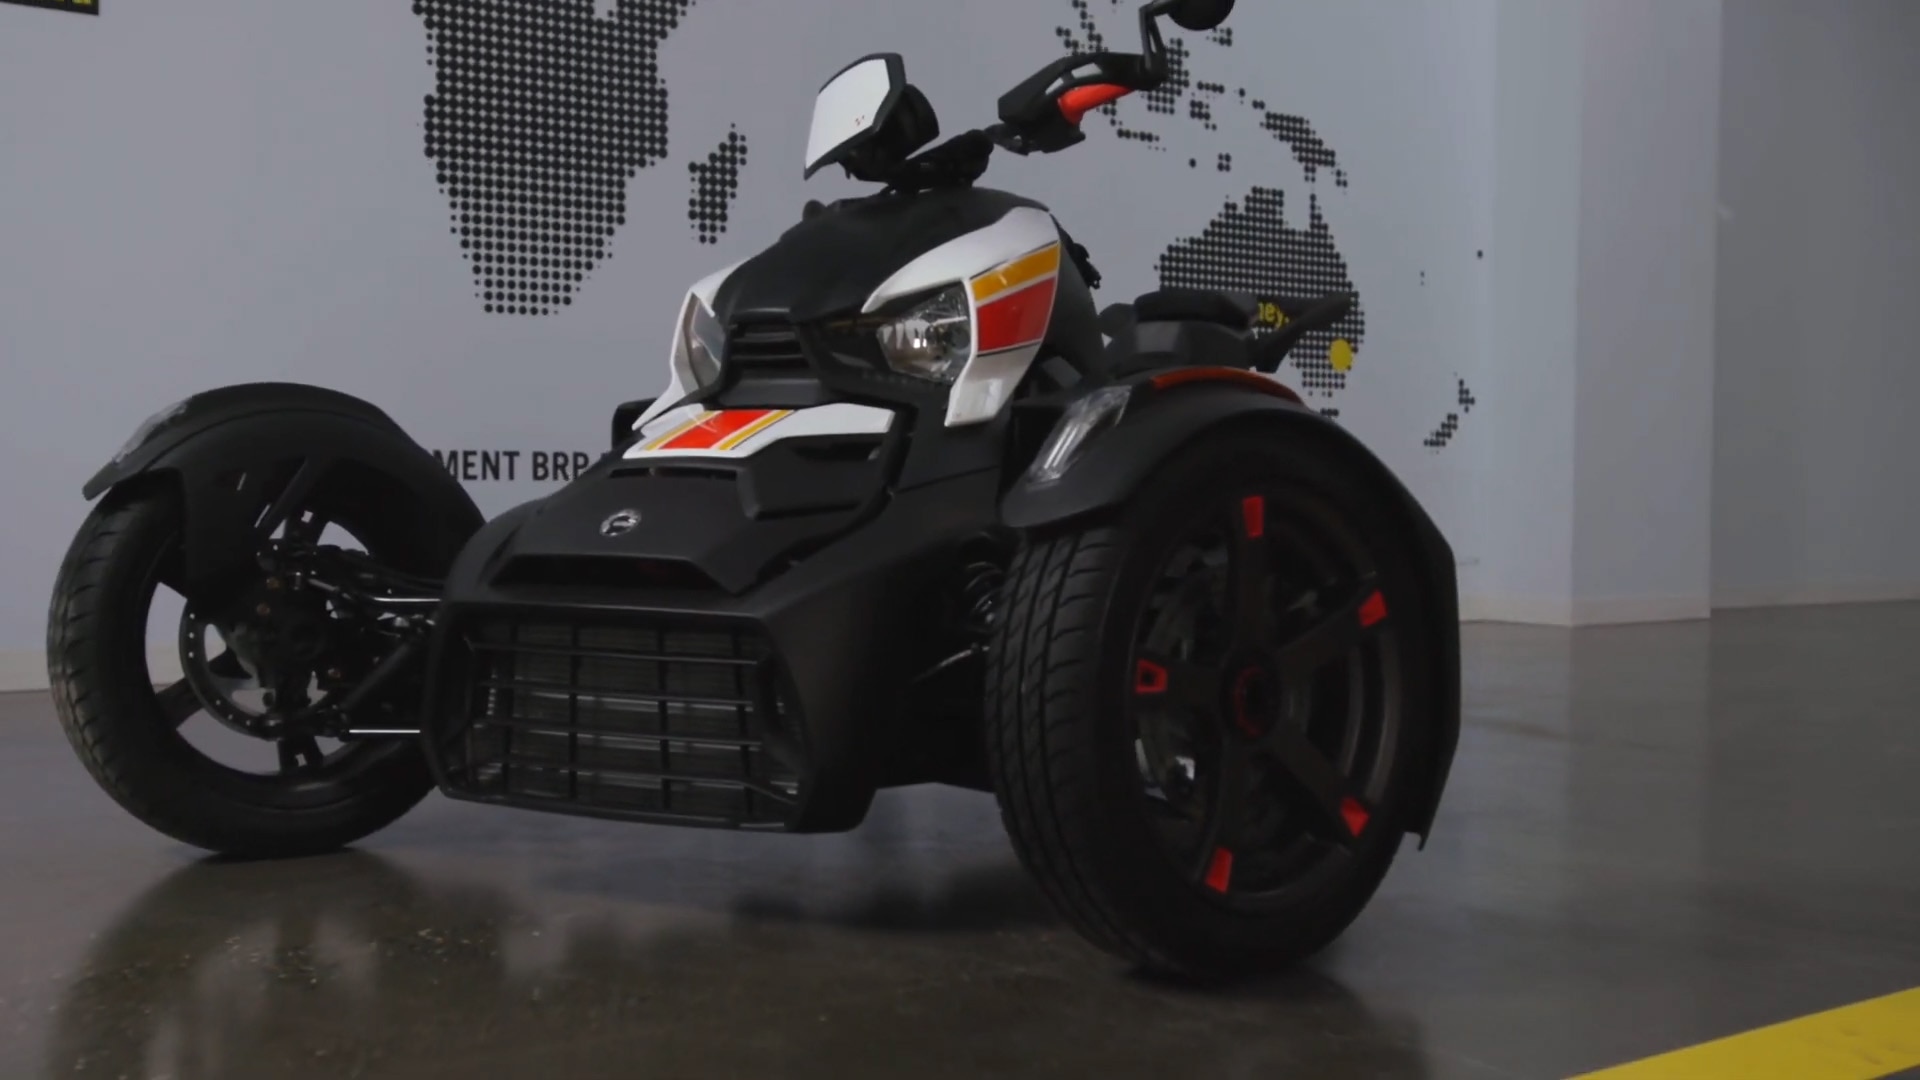 View of a custom Can-Am Ryker